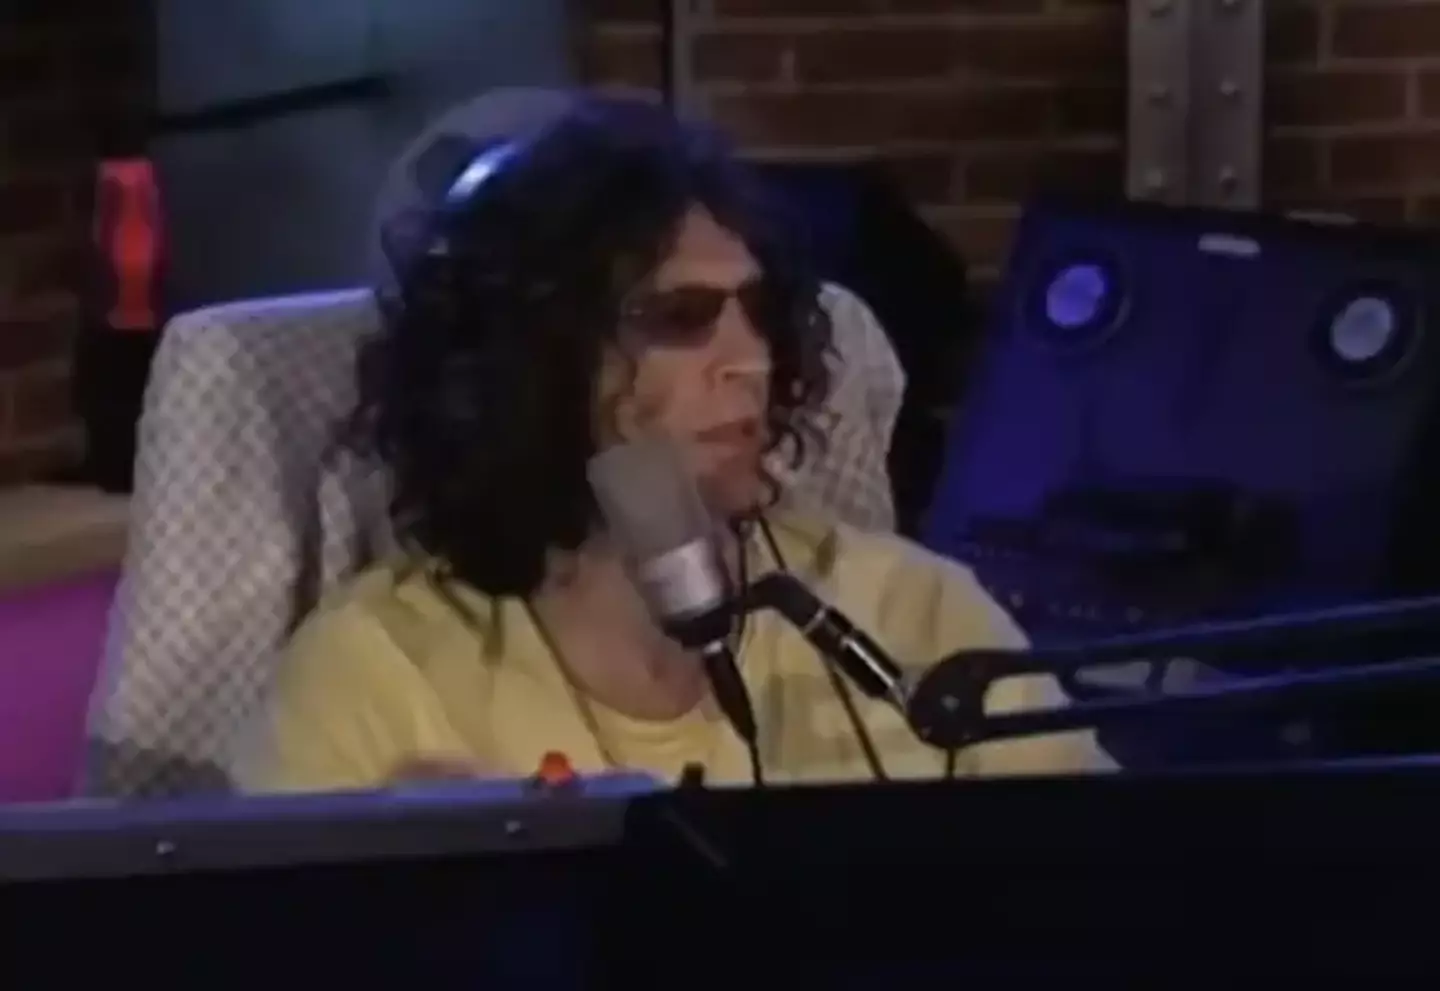 Social media users were appalled by Howard Stern's comments.